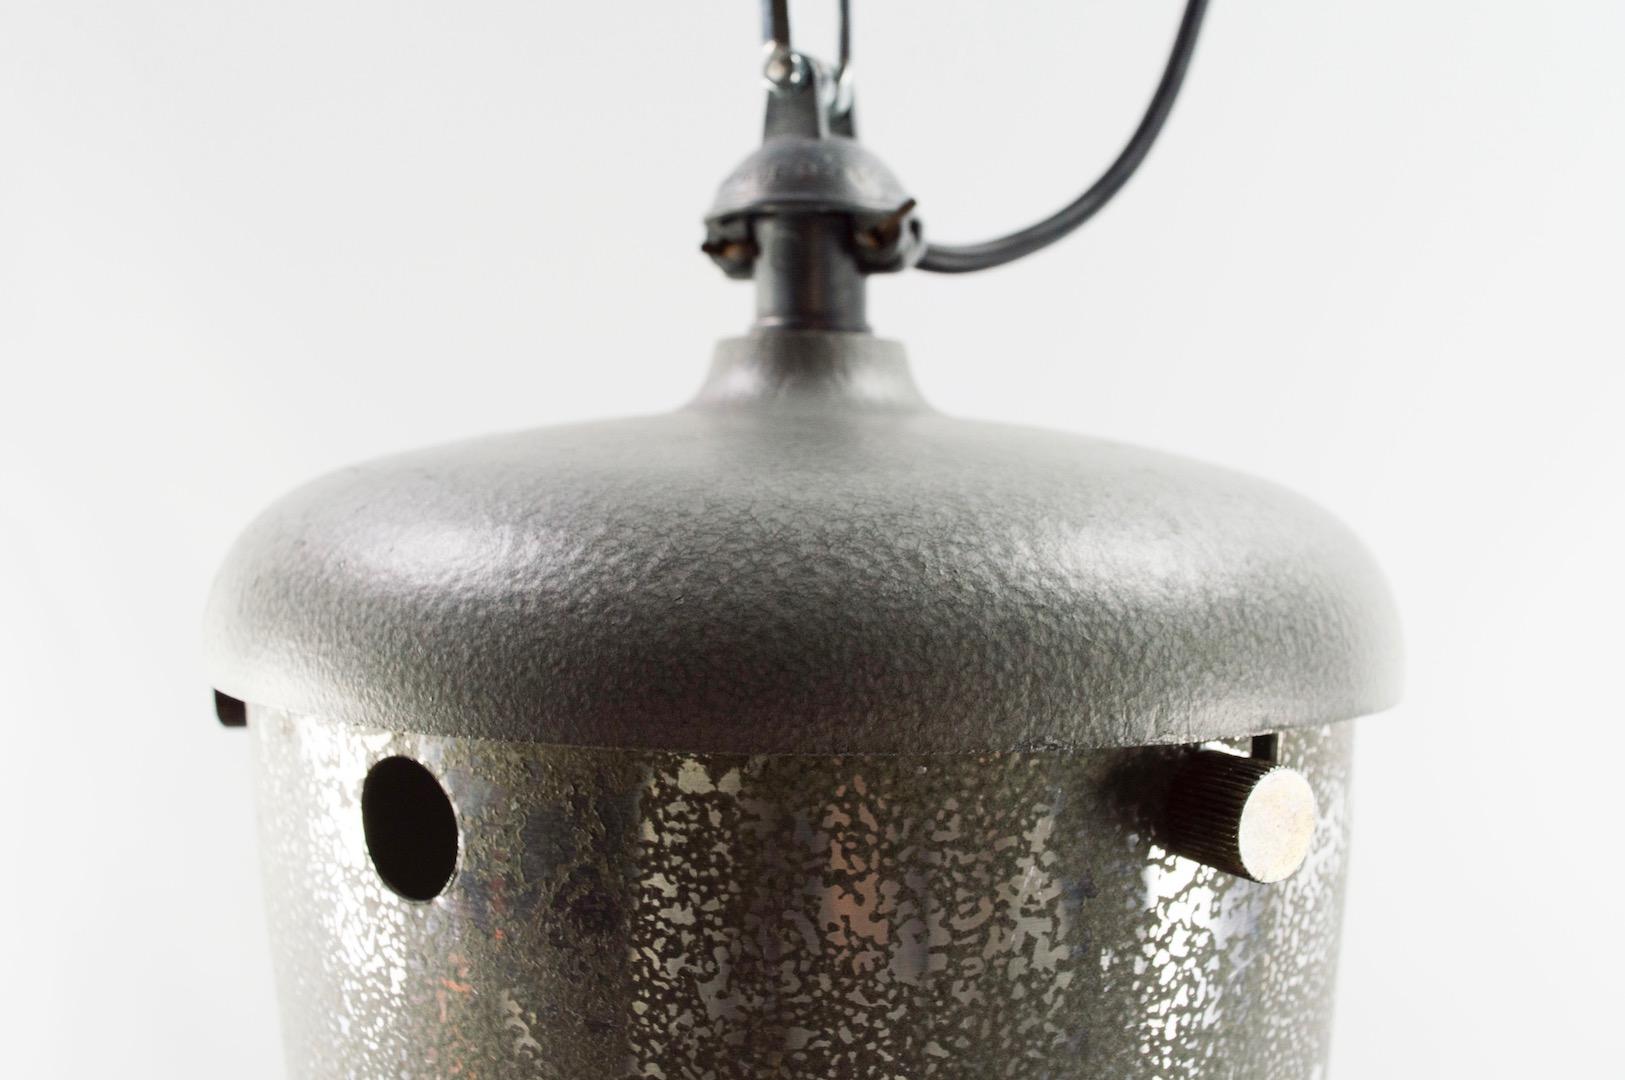 Industrial light pendant RELUMA
Beautiful old and stylish black enamel RELUMA (made in Belgium) factory lamps from the 1950s/60s. These large Reluma industrial hanging lamps come from France. The lamps have minor signs of age and use and are in